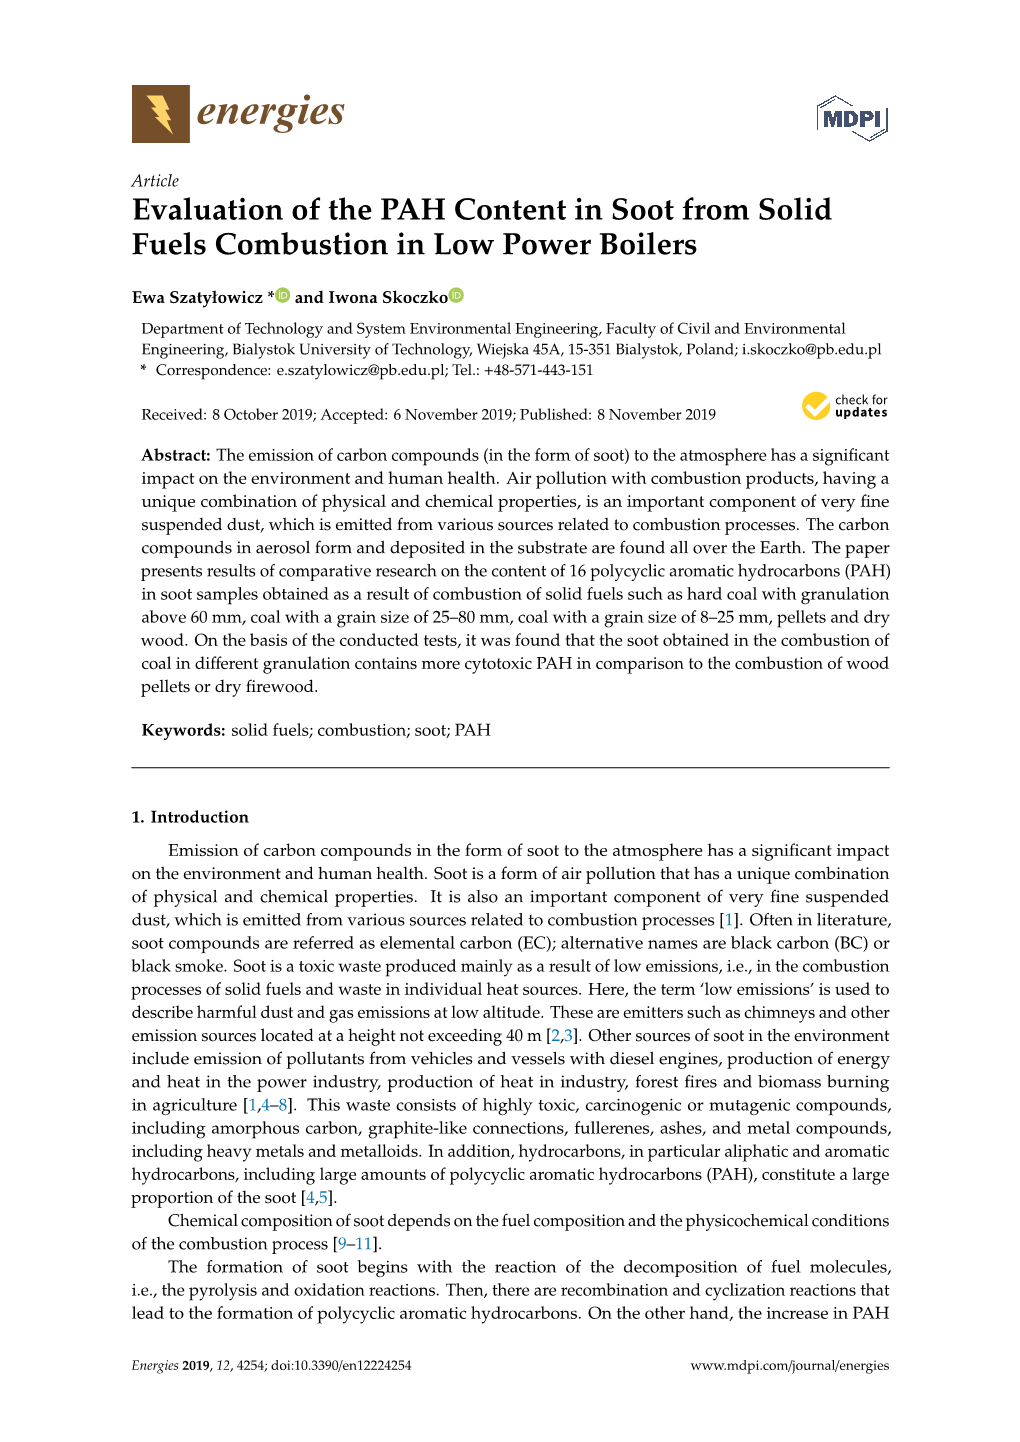 Evaluation of the PAH Content in Soot from Solid Fuels Combustion in Low Power Boilers